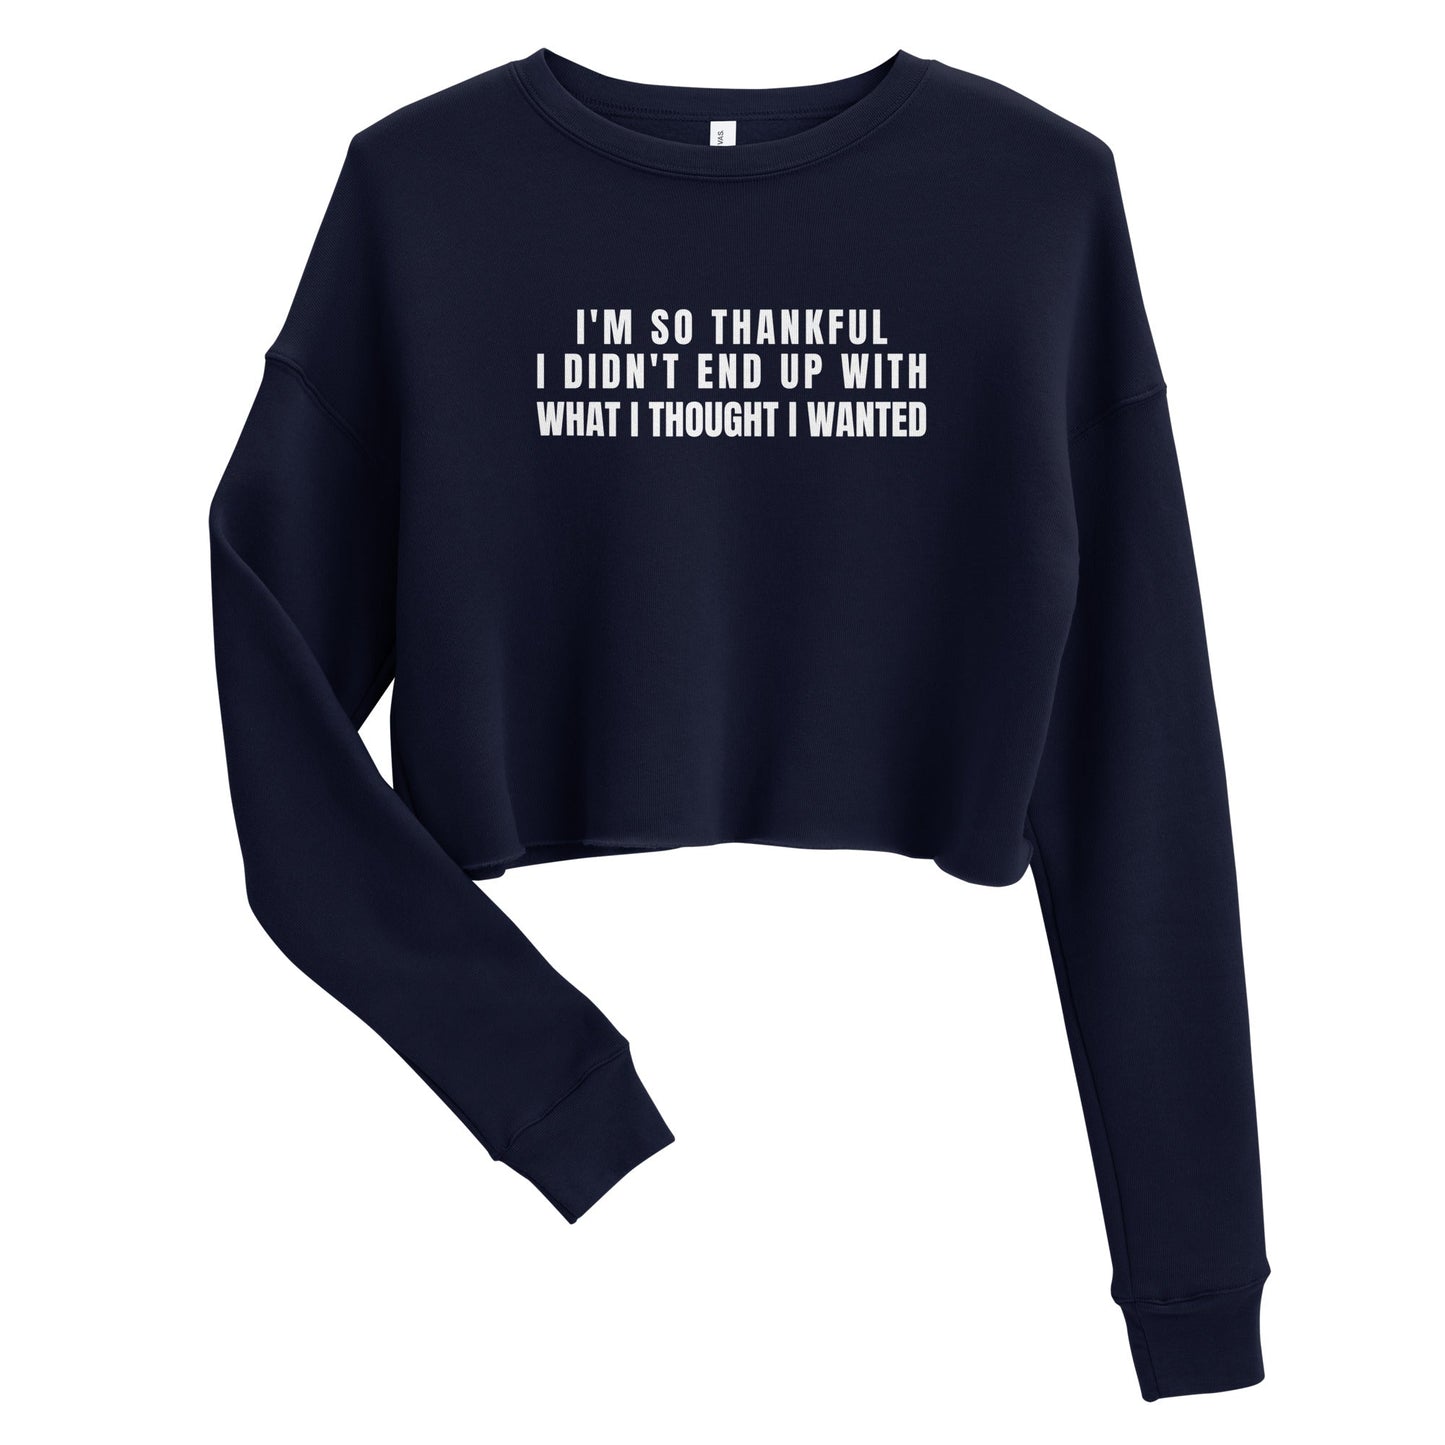 I'm So Thankful I Didn't End Up With What I Thought I Wanted Crop Sweatshirt - Catch This Tea Shirts